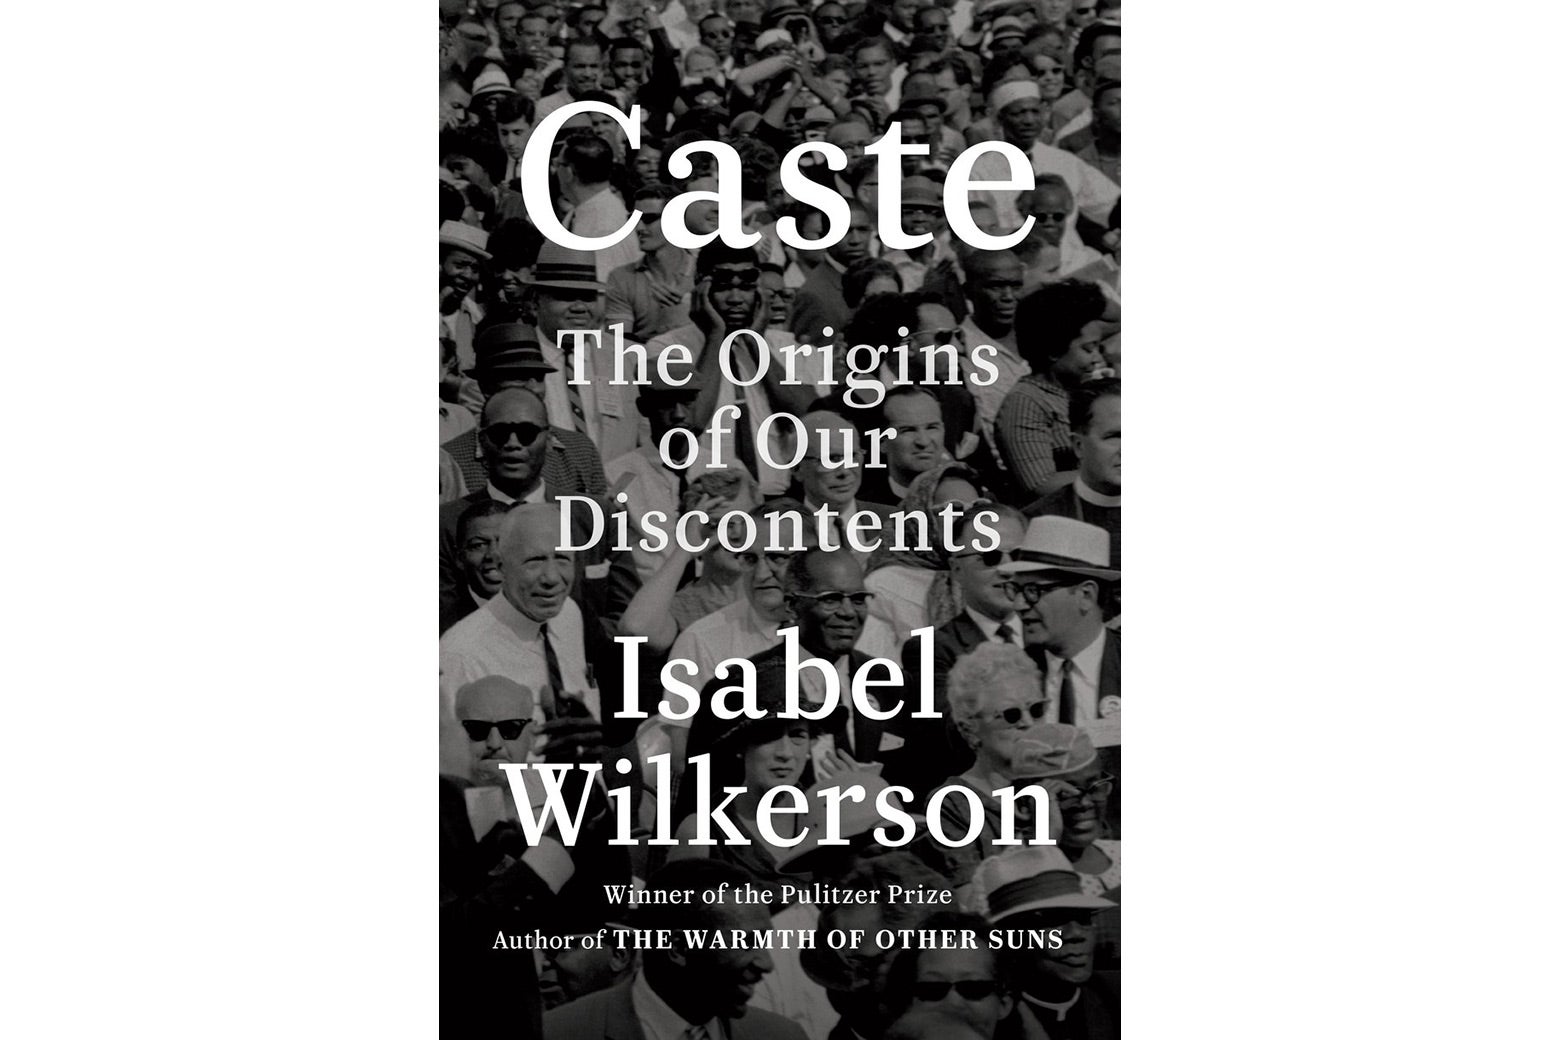 The cover of Caste.